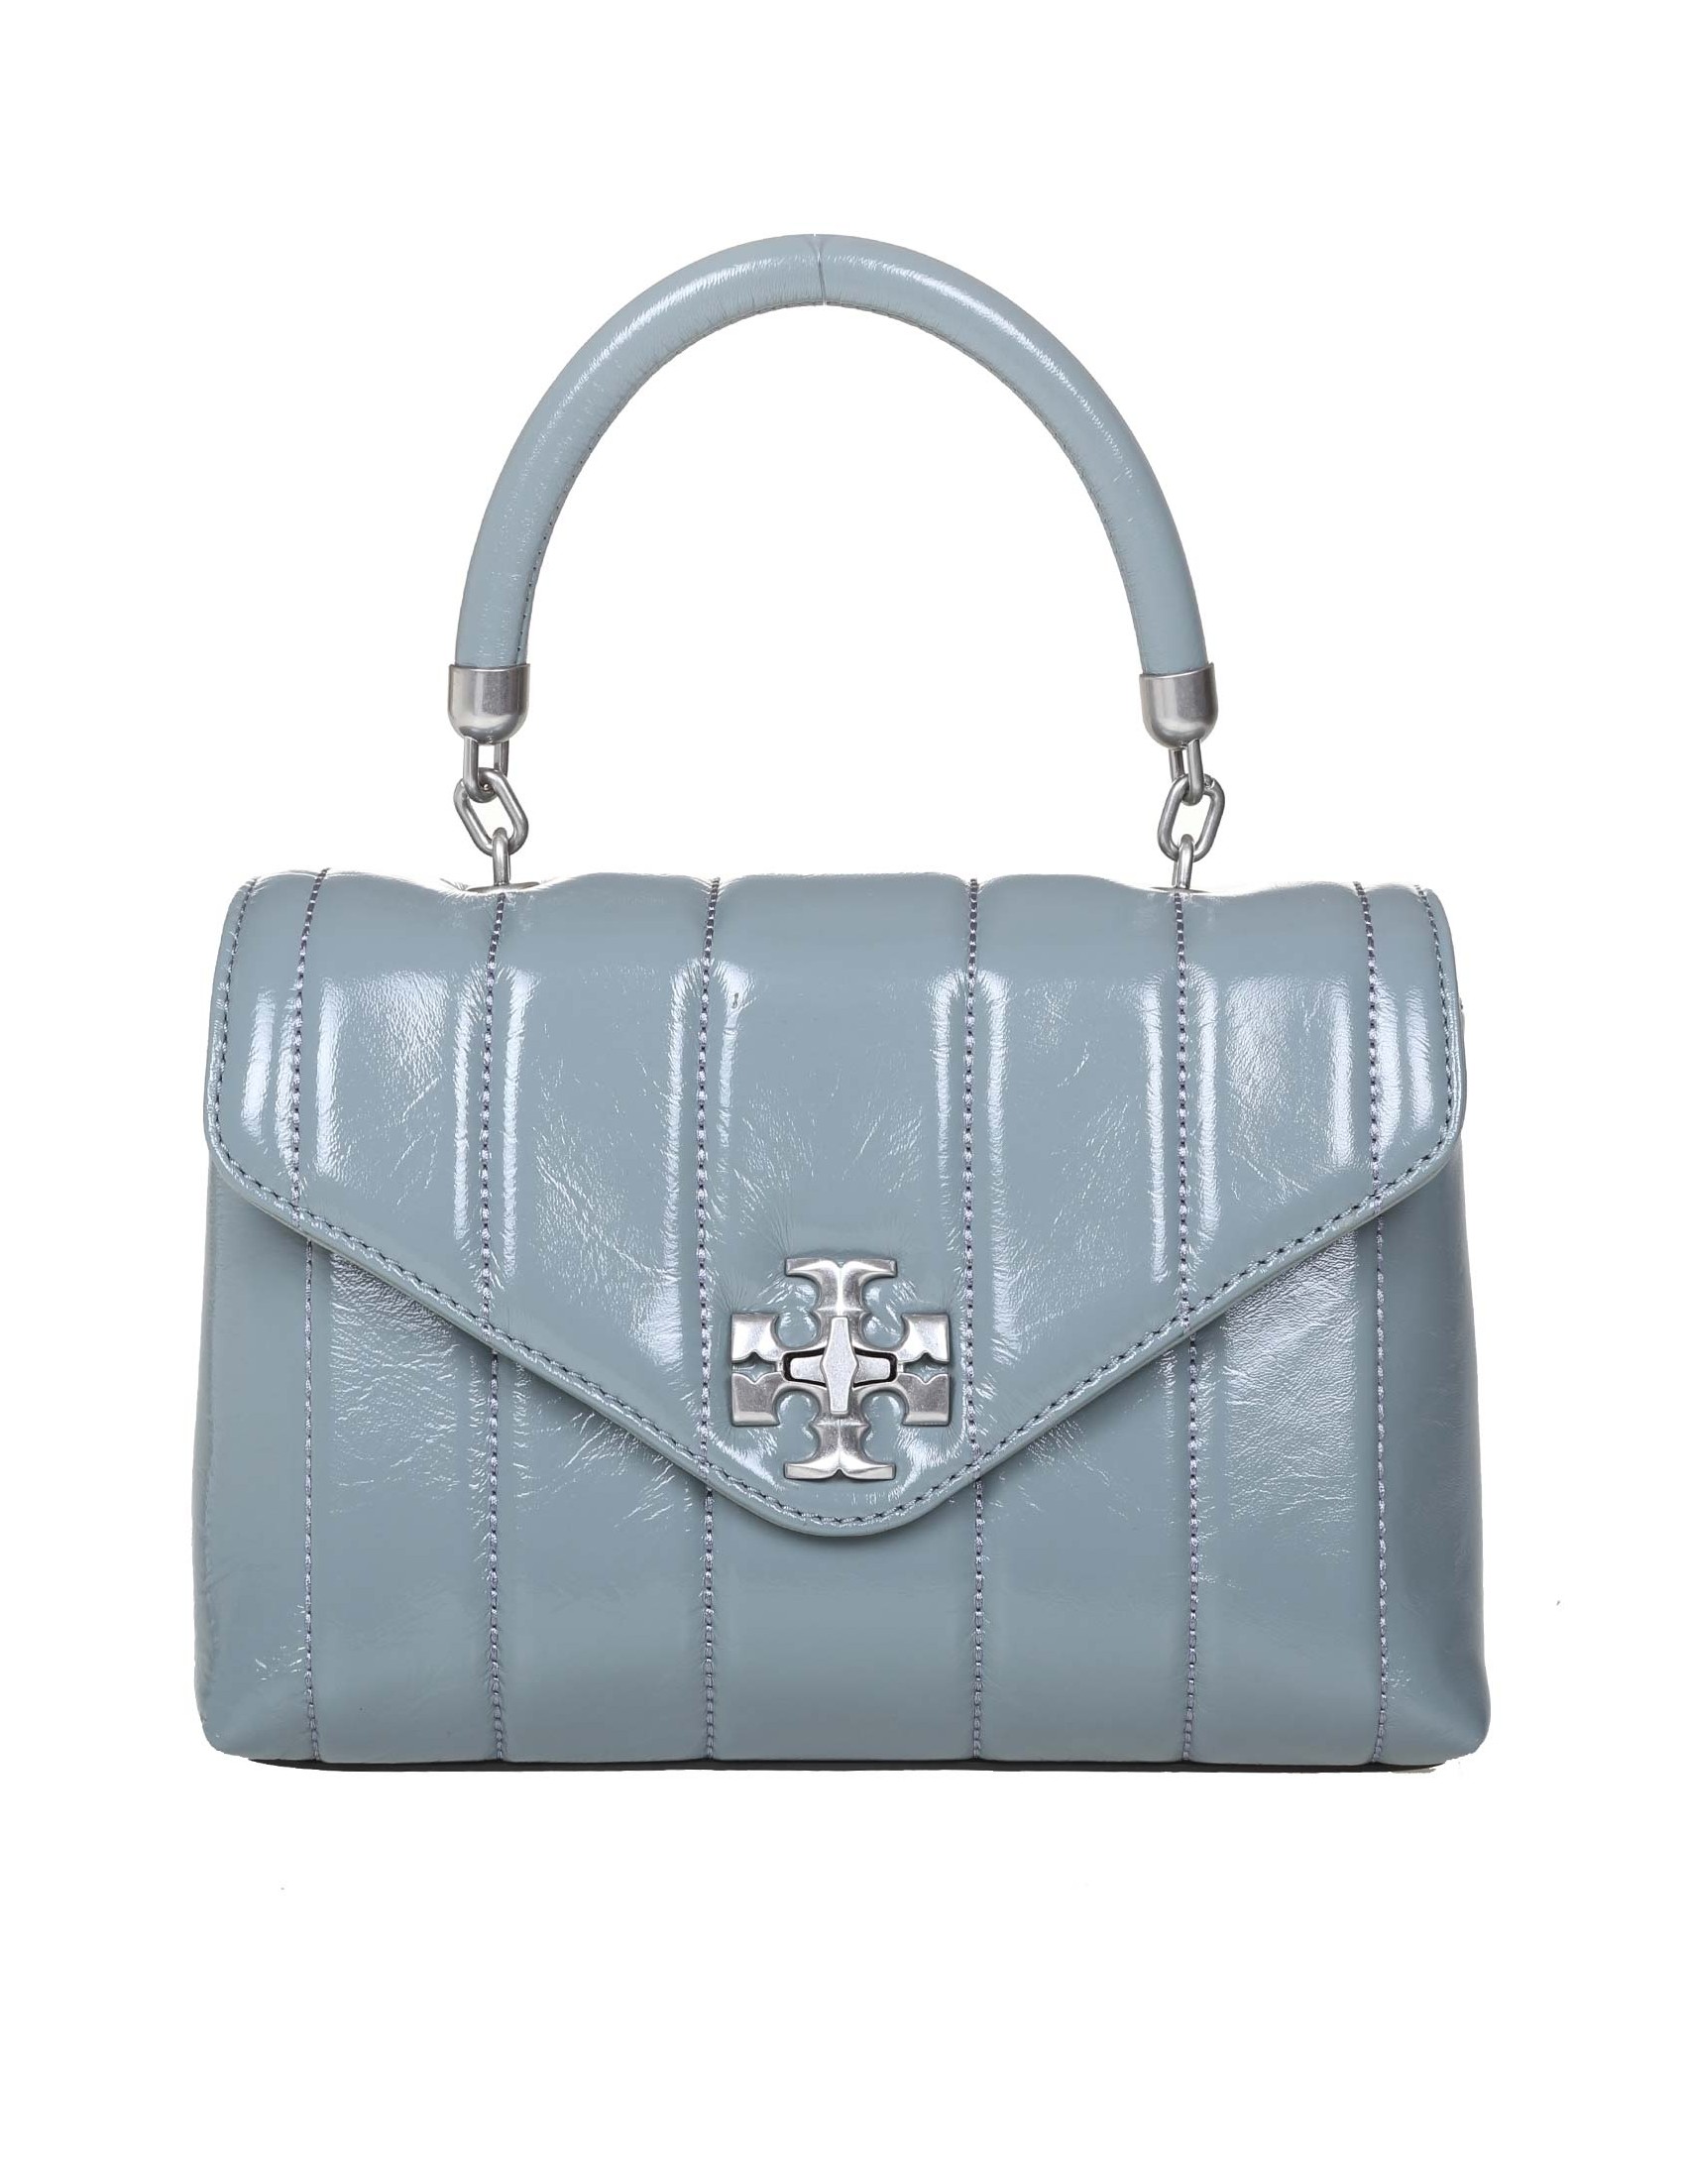 TORY BURCH KIRA SMALL HANDBAG IN QUILTED LEATHER